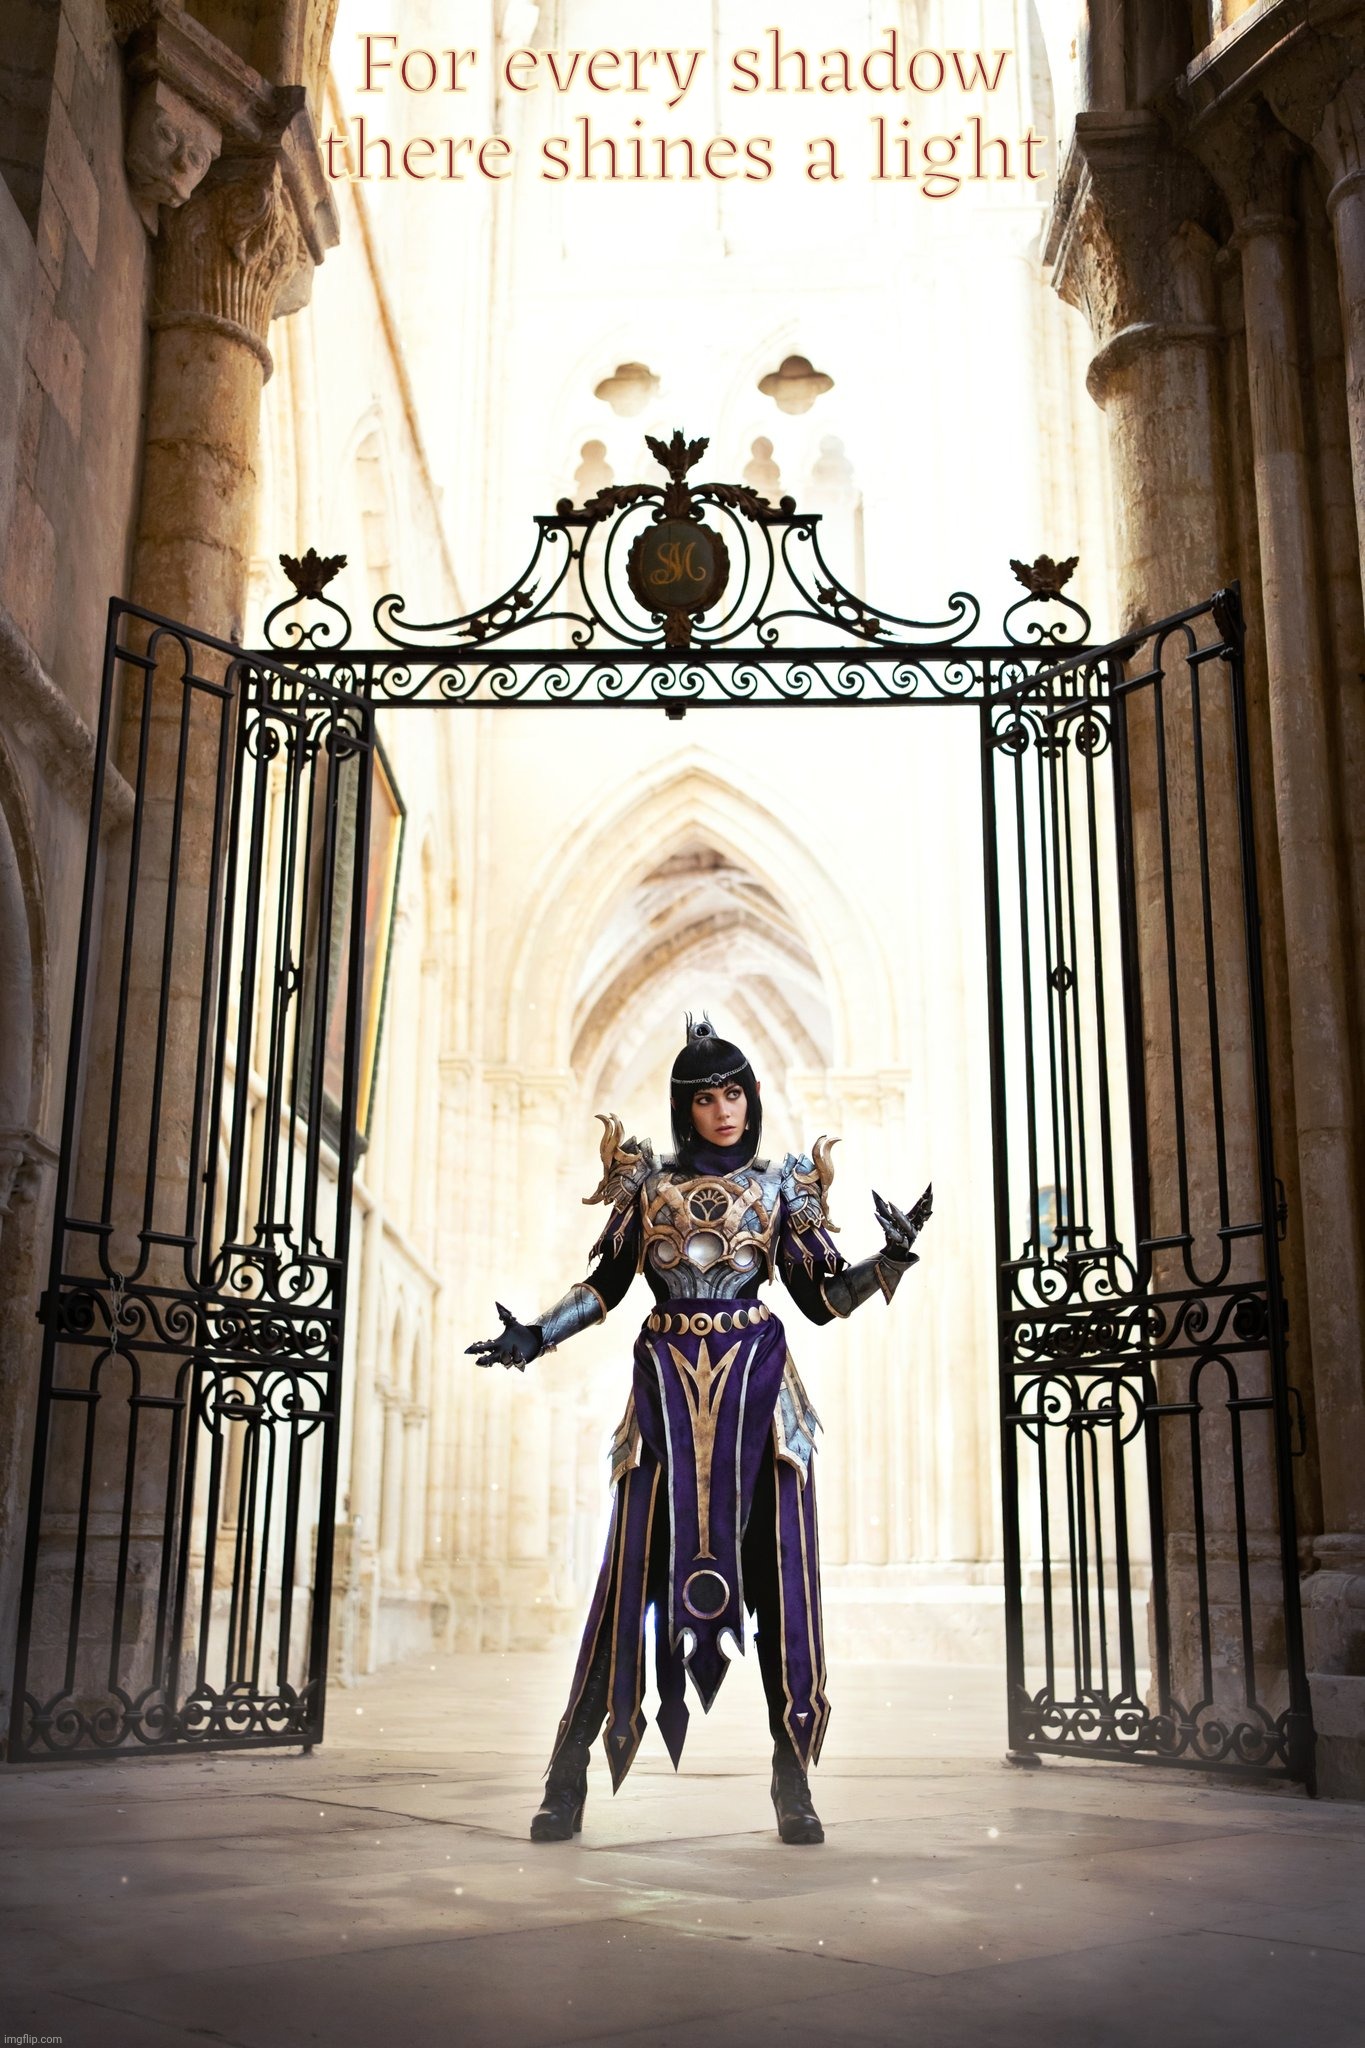 CinderysCosplay as Shadowheart from Baldur's Gate 3 | For every shadow
there shines a light | image tagged in cinderys,cinderyscosplay,shadowheart,baldur's gate 3,cosplay | made w/ Imgflip meme maker